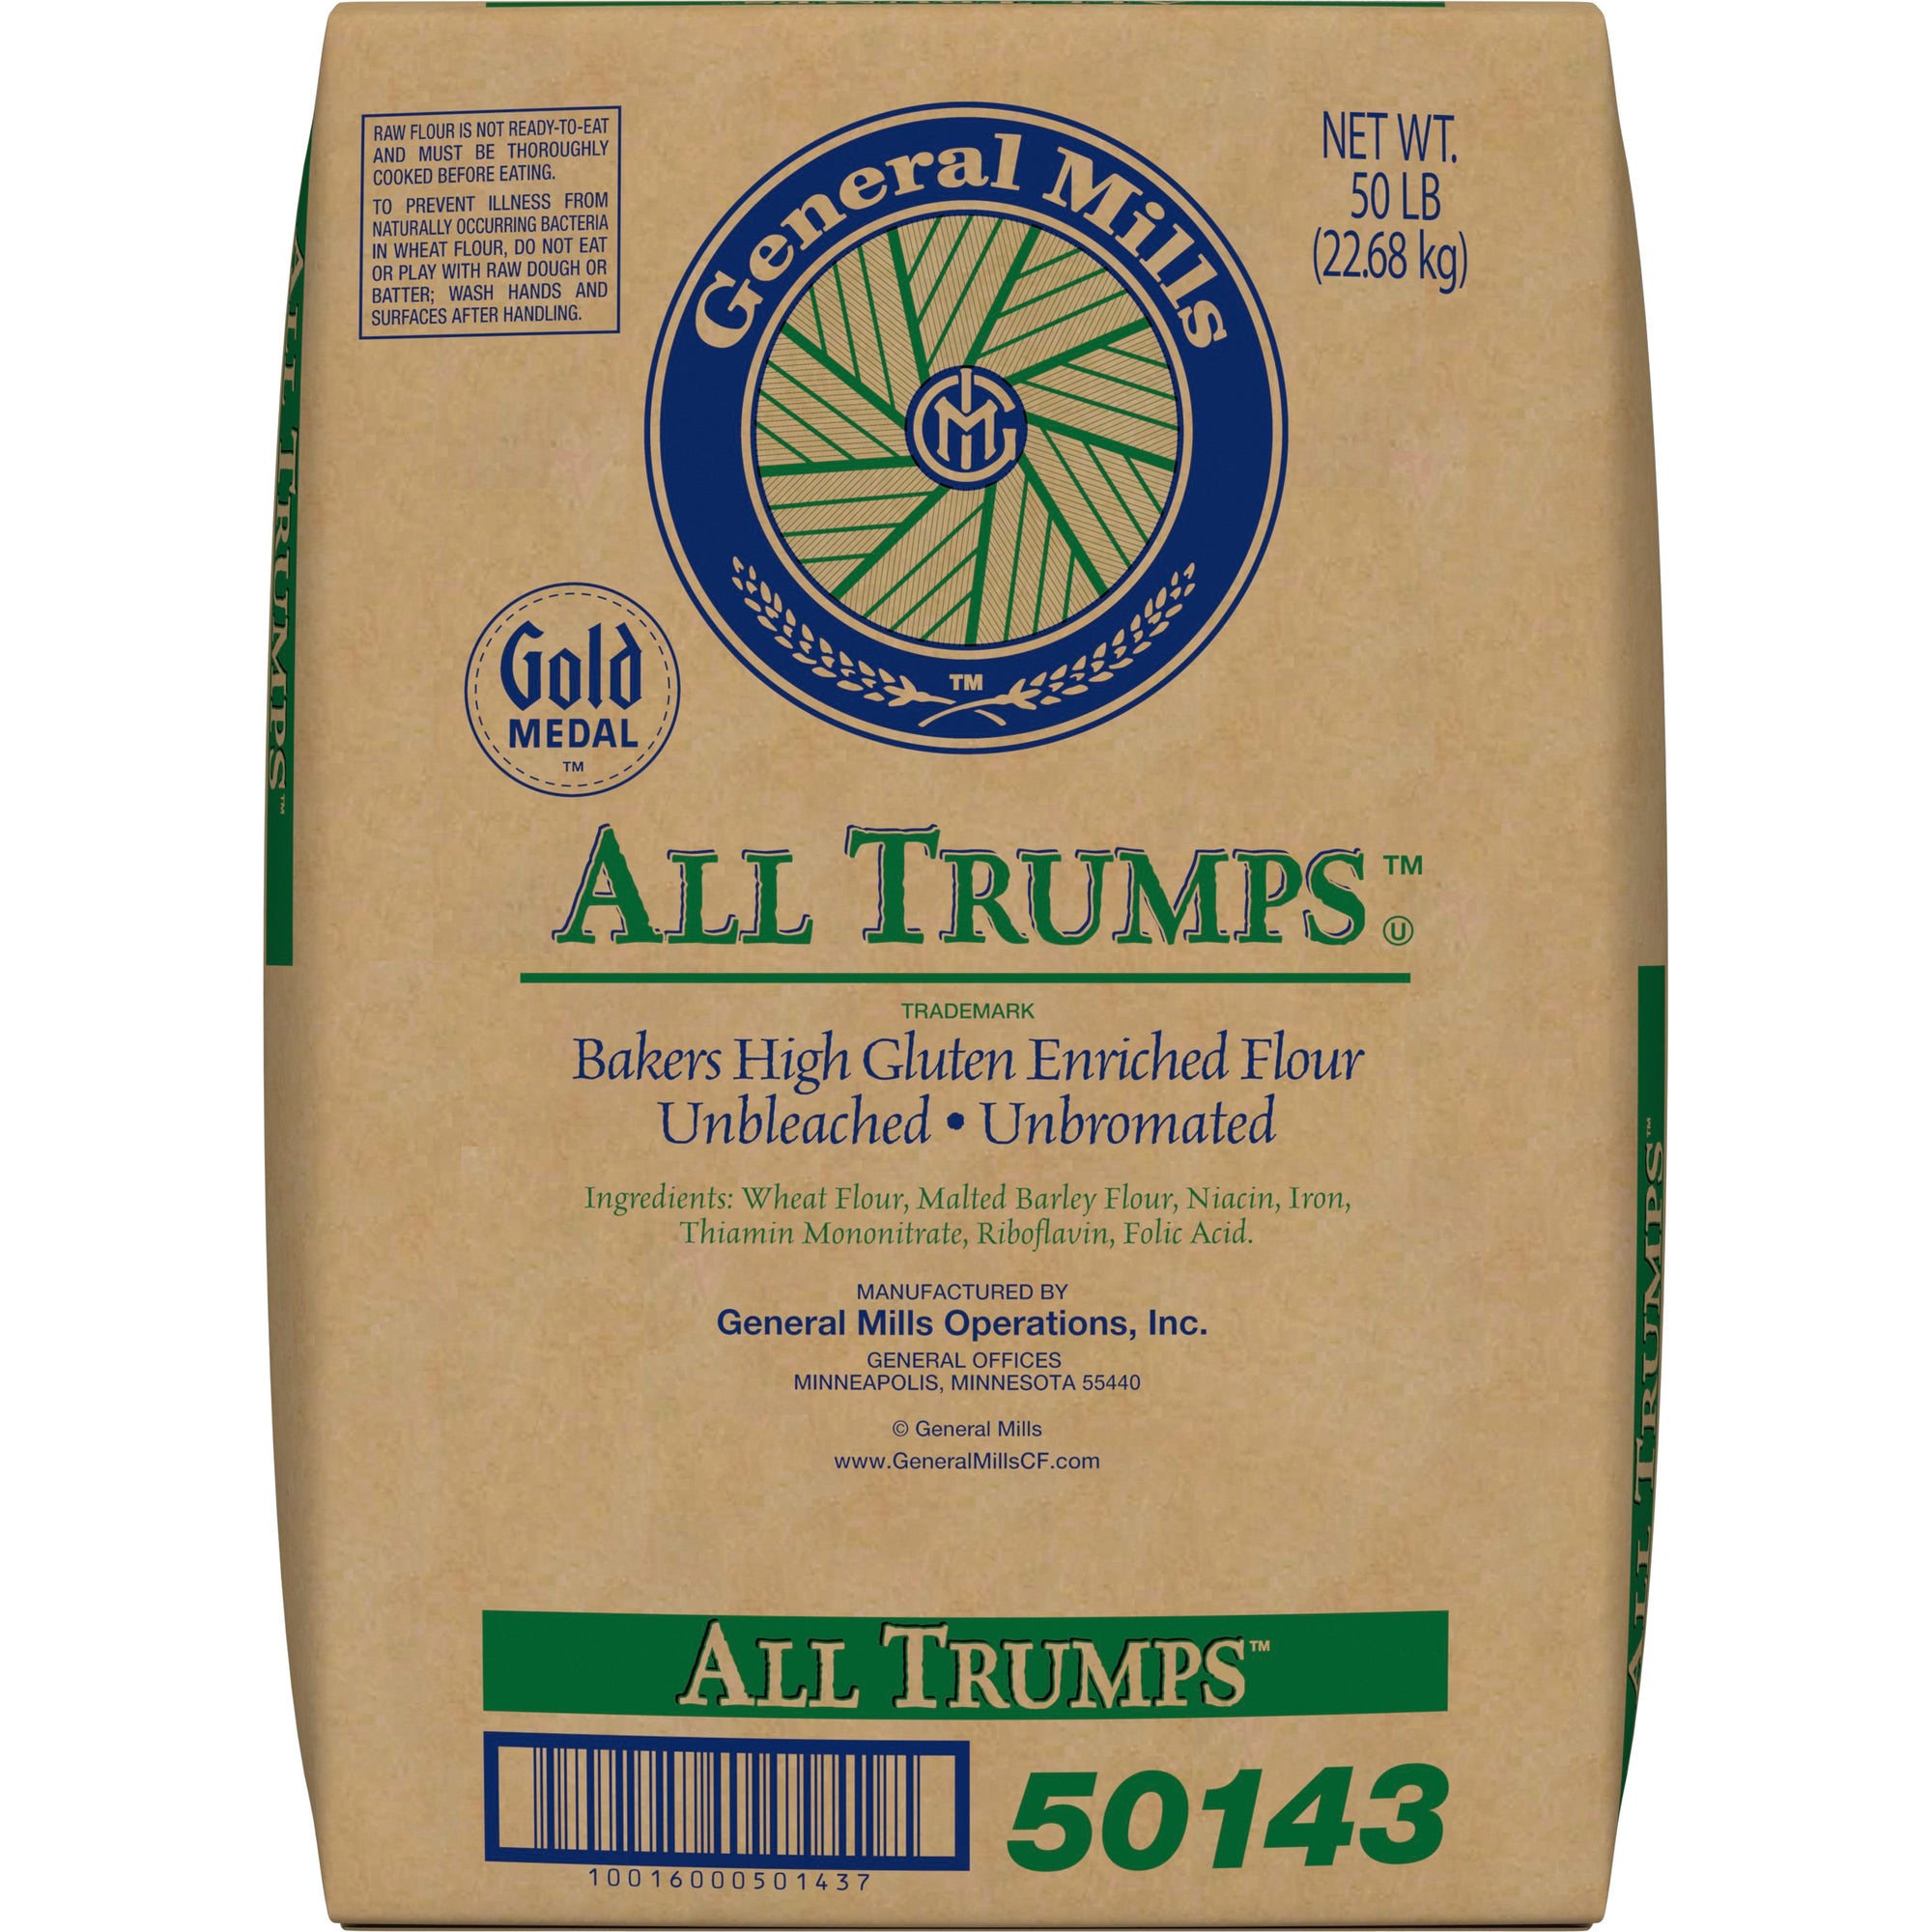 All Trumps(TM) Gold Medal  Flour High Gluten Enriched Unbleached Unbromated